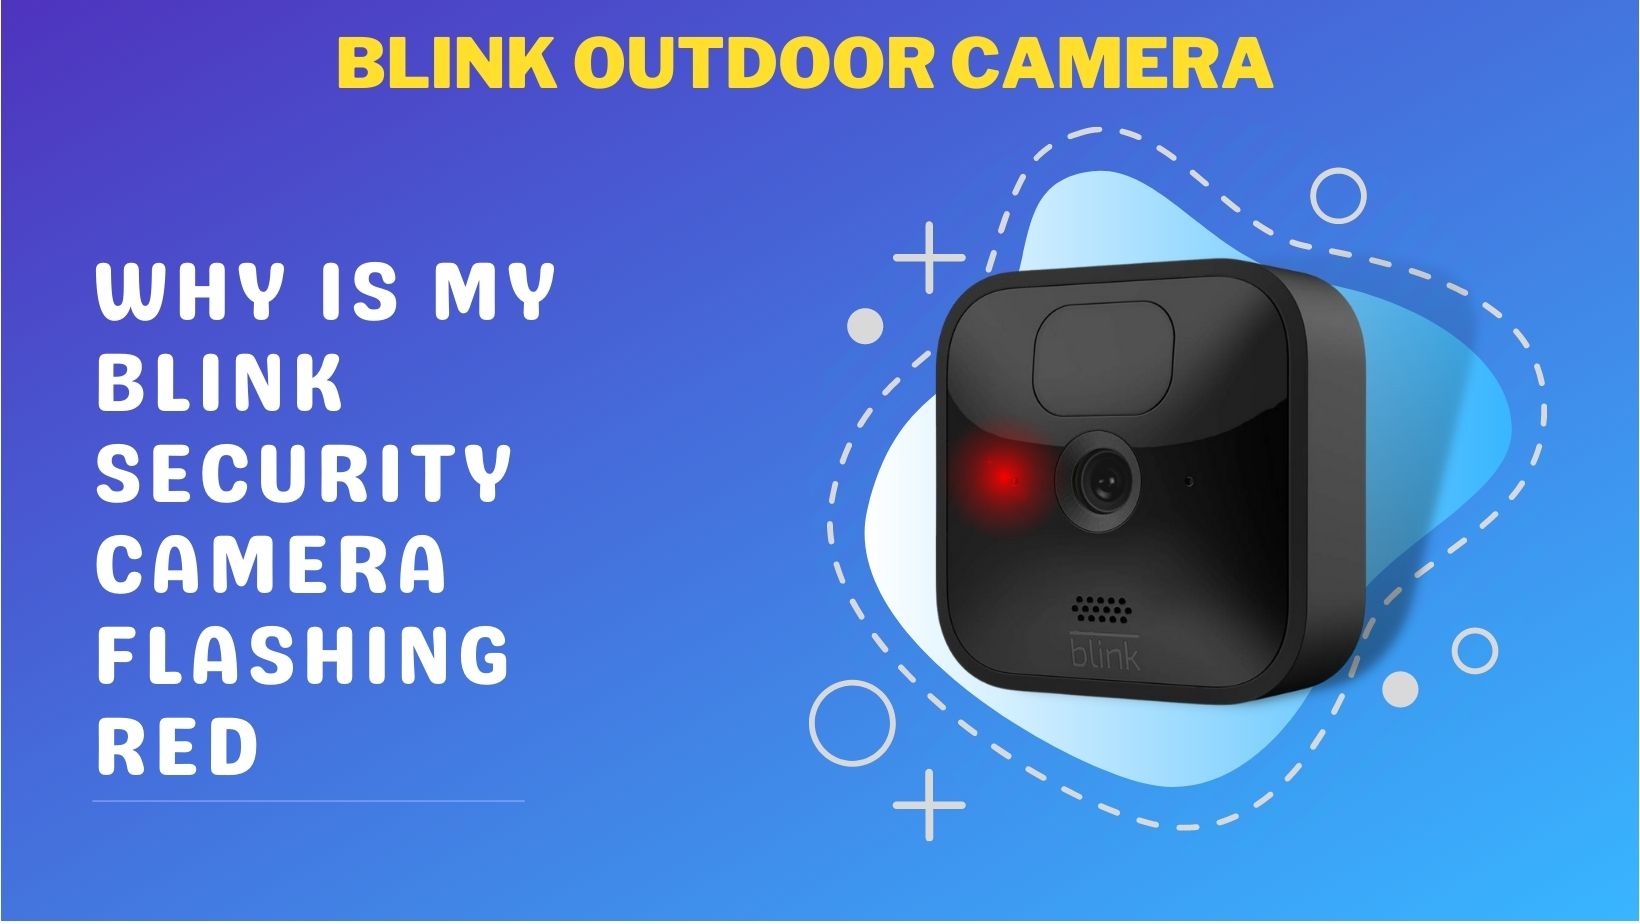 Why is my blink security camera flashing red